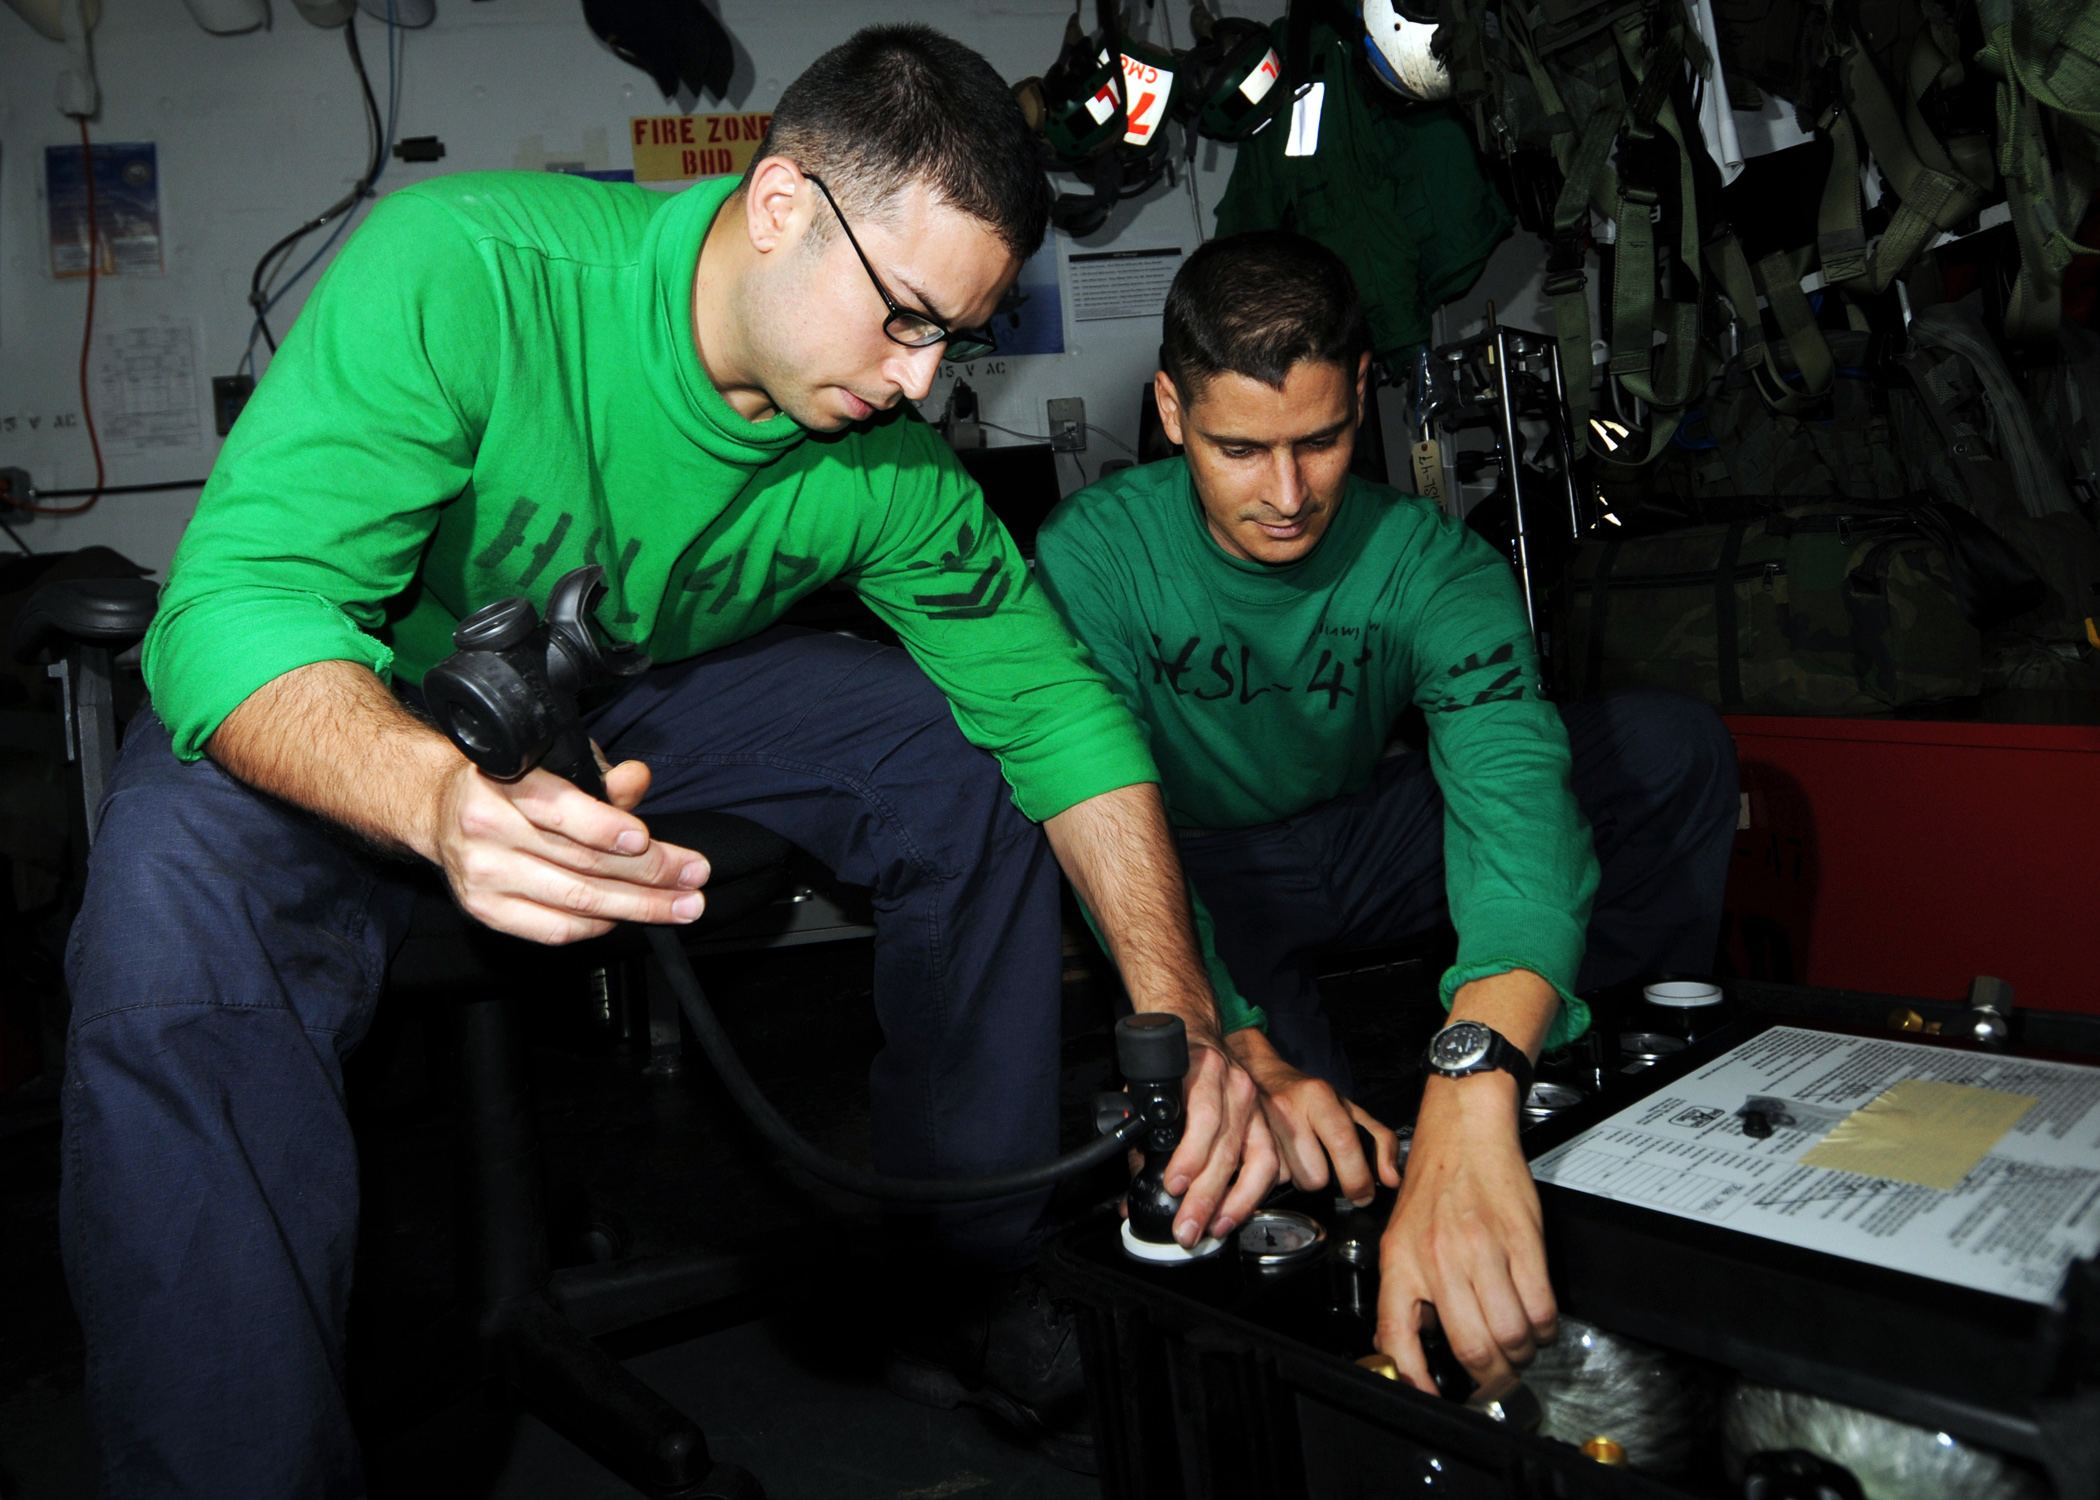 US Navy 080627-N-9898L-020 Aircrew Survival Equipmentman 2nd Class Joe Quintero, left, and Aircrew Survival Equipmentman 1st Class Brian Hawks fill emergency breathing bottles for survival vests